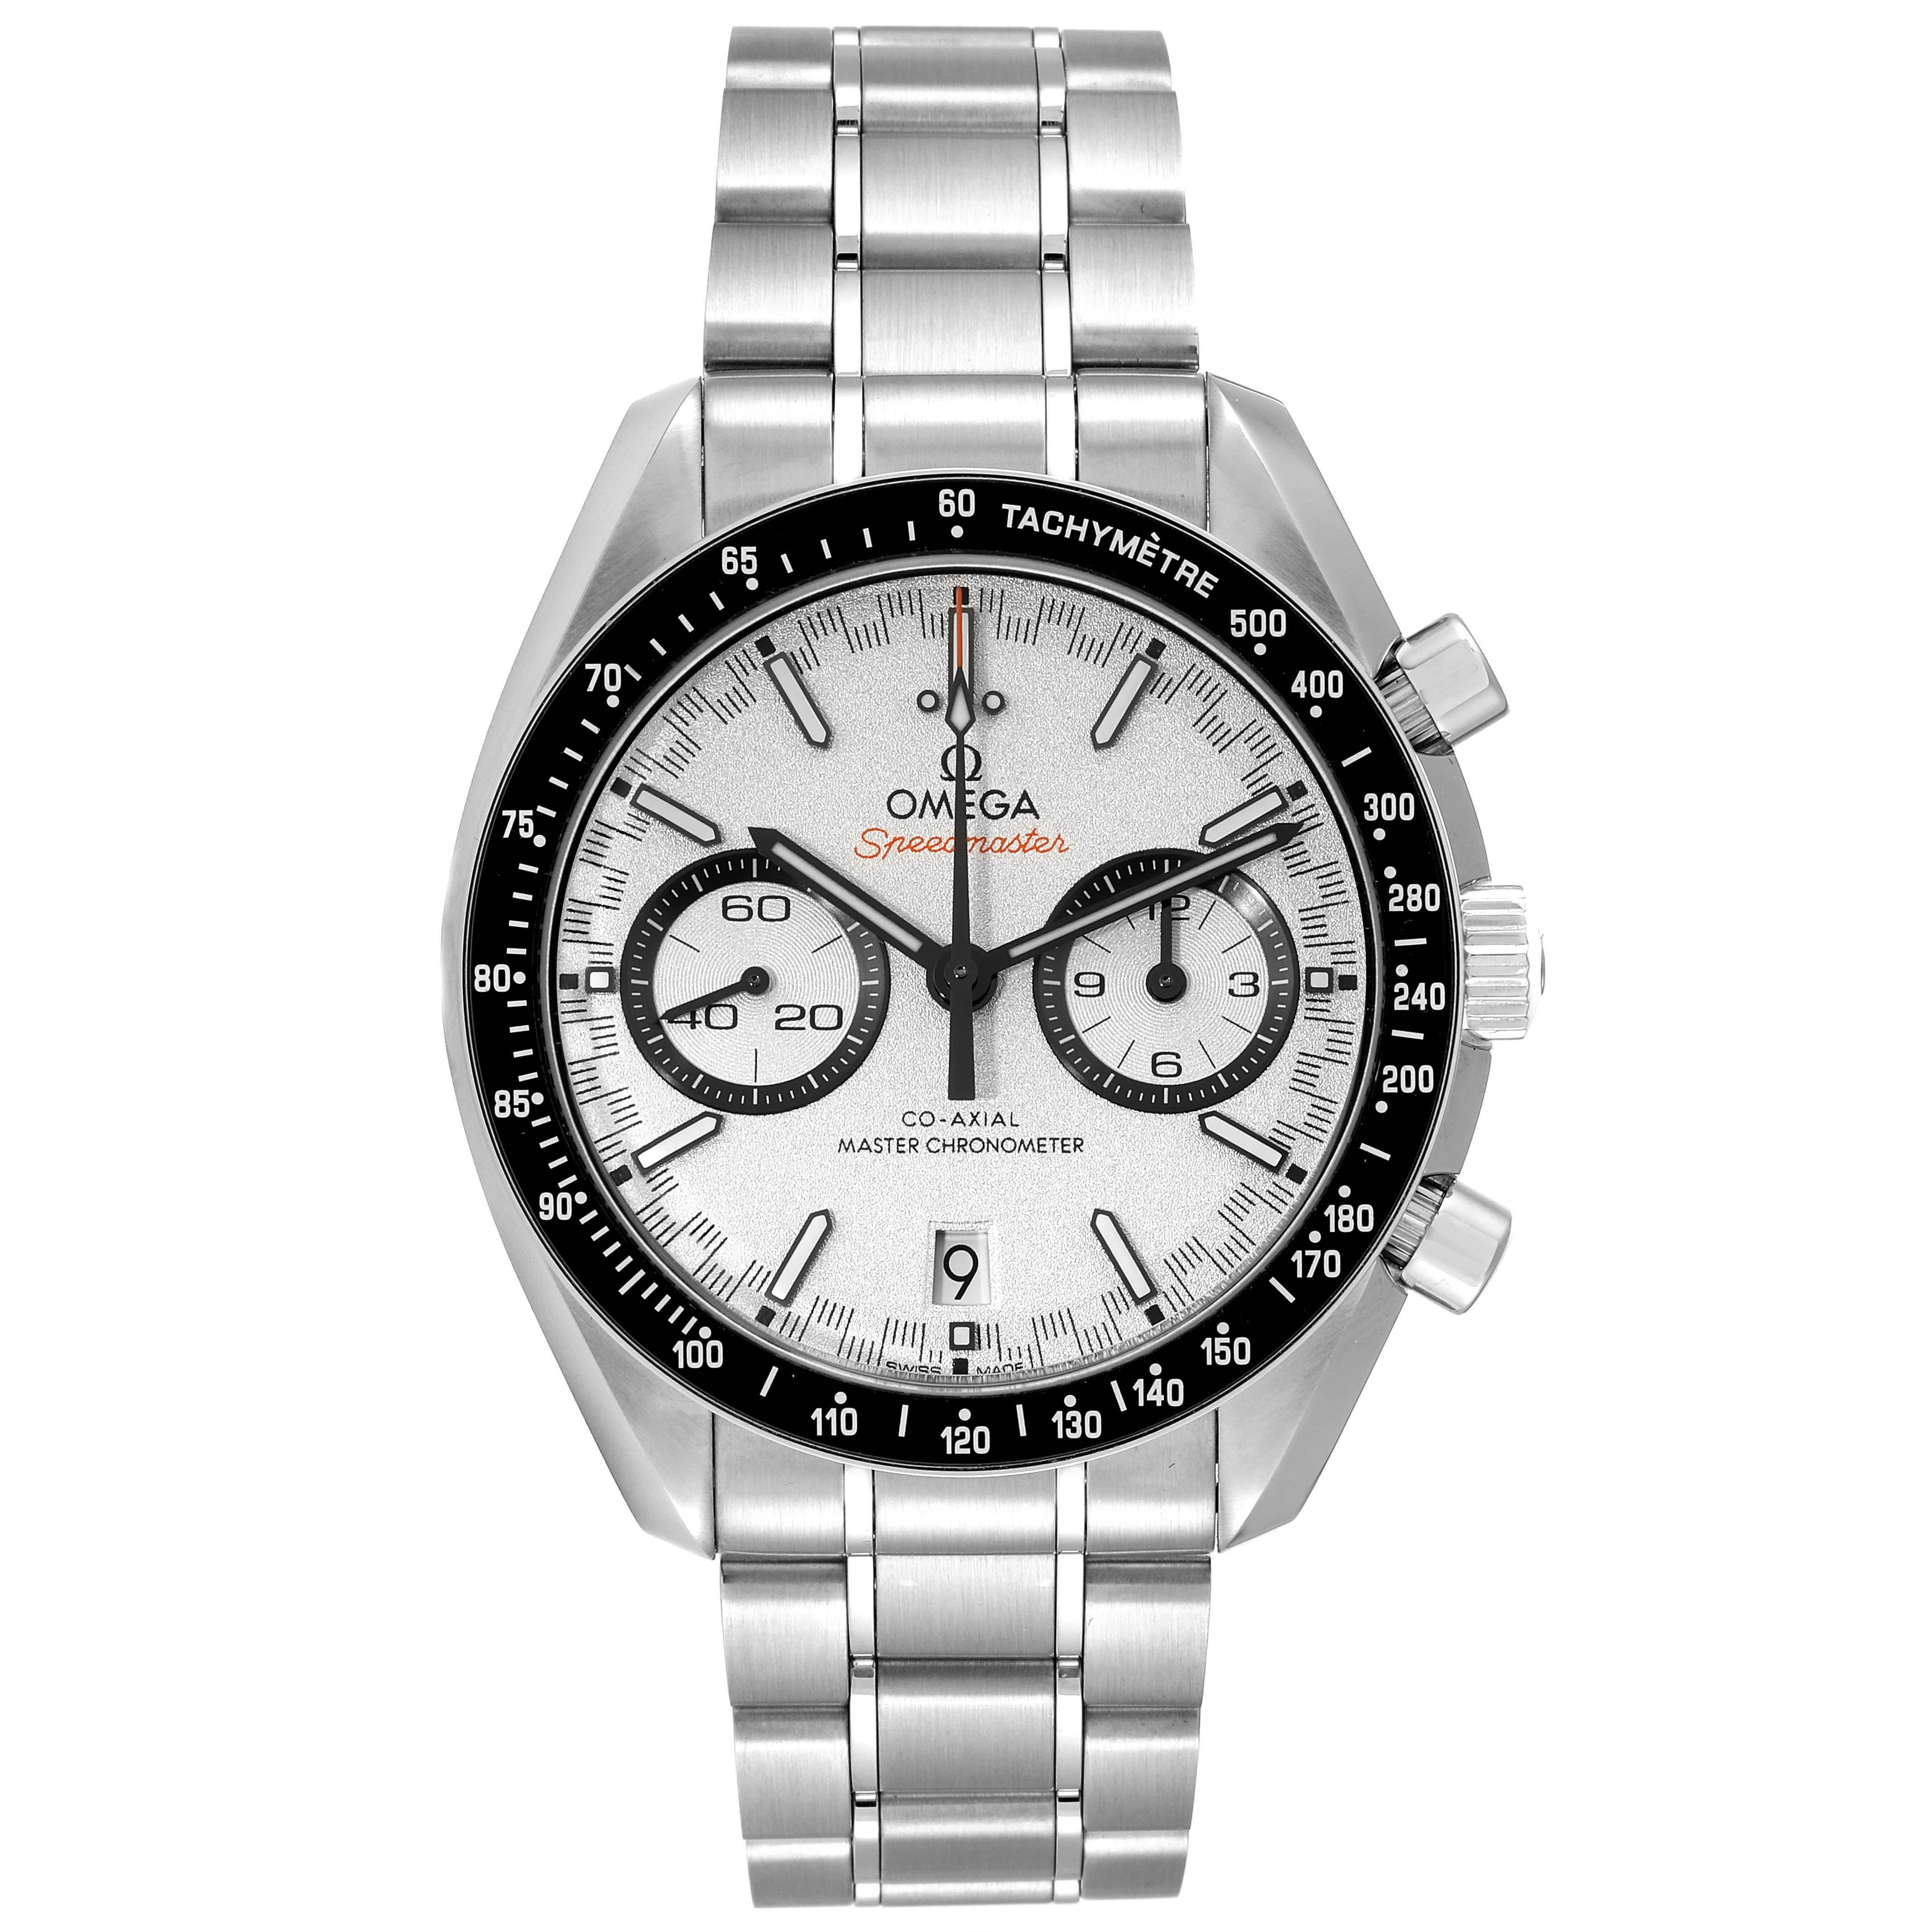 Omega Speedmaster Racing Steel Mens Watch 329.30.44.51.04.001 Box Card. Automatic self-winding chronograph movement with column wheel and Co-Axial escapement. Certified Master chronometer, resistant to magnetic fields reaching 15,000 gauss.